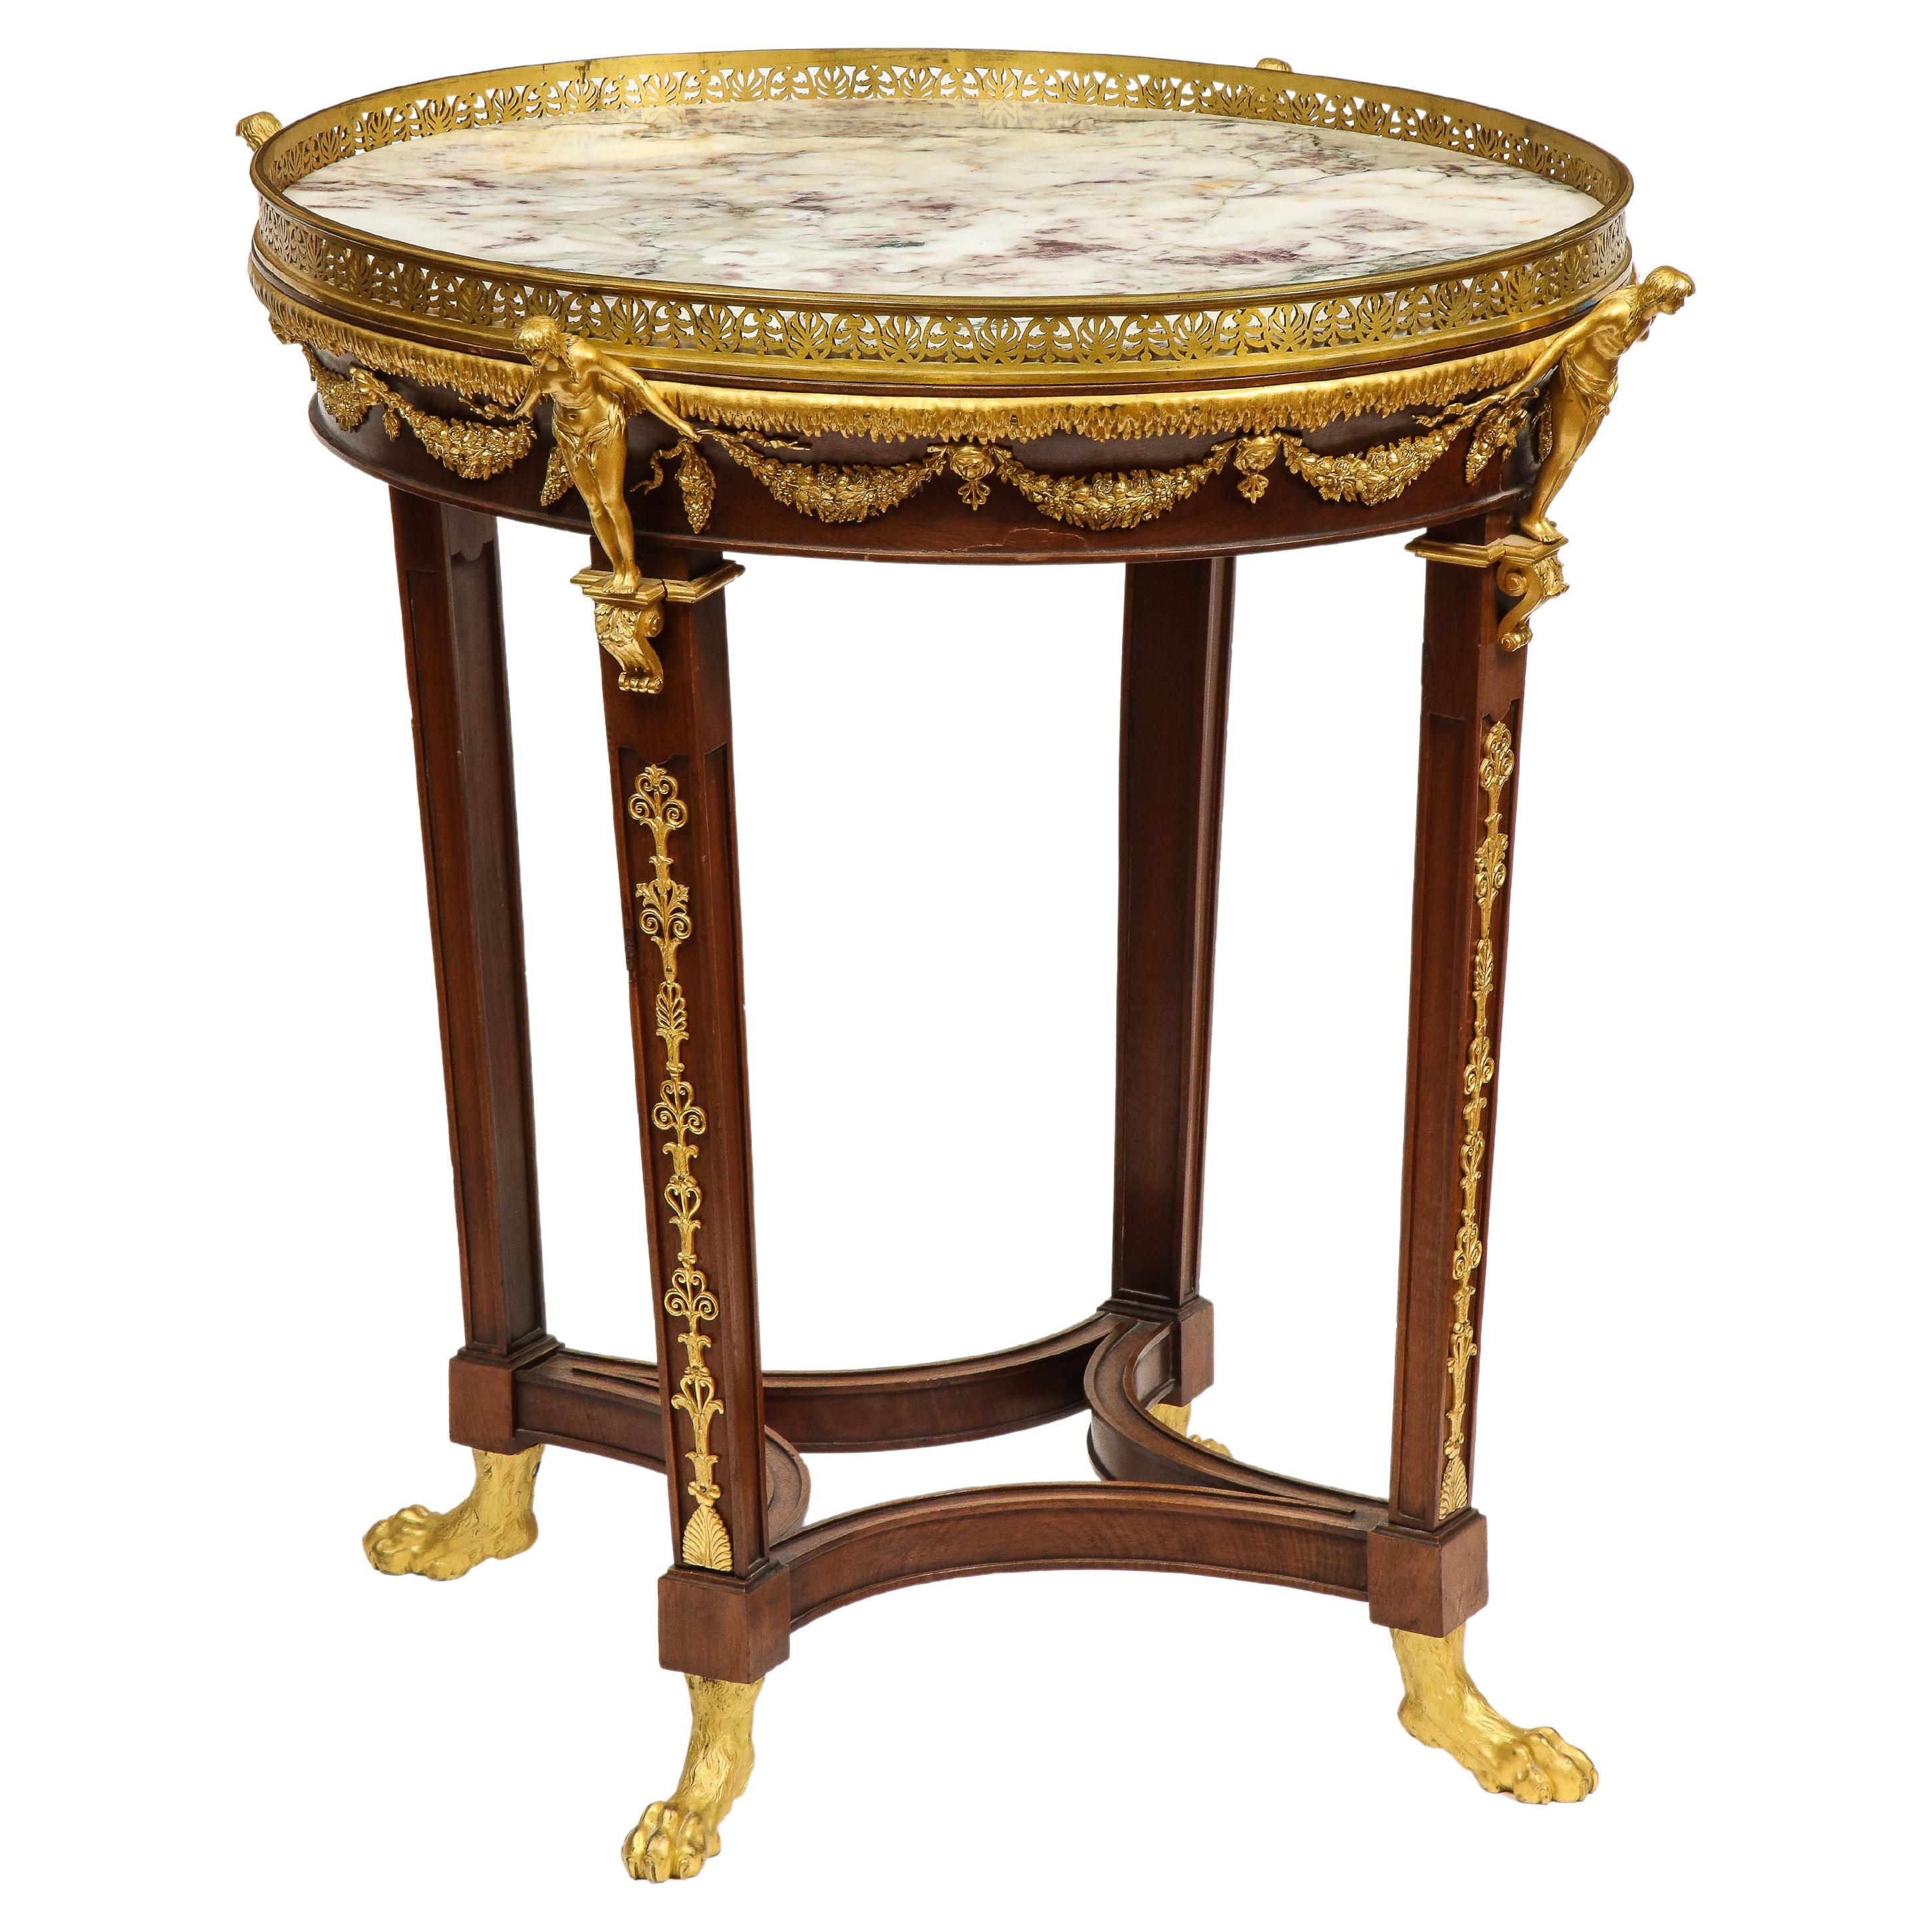 An extremely fine Russian Empire Ormolu Mounted Mahogany center table, circa 1820-1830.

Very finely mounted with crisp ormolu throughout, with bronze female figures, foliate scrolling, lions head mounts, and bronze paw feet. With the original